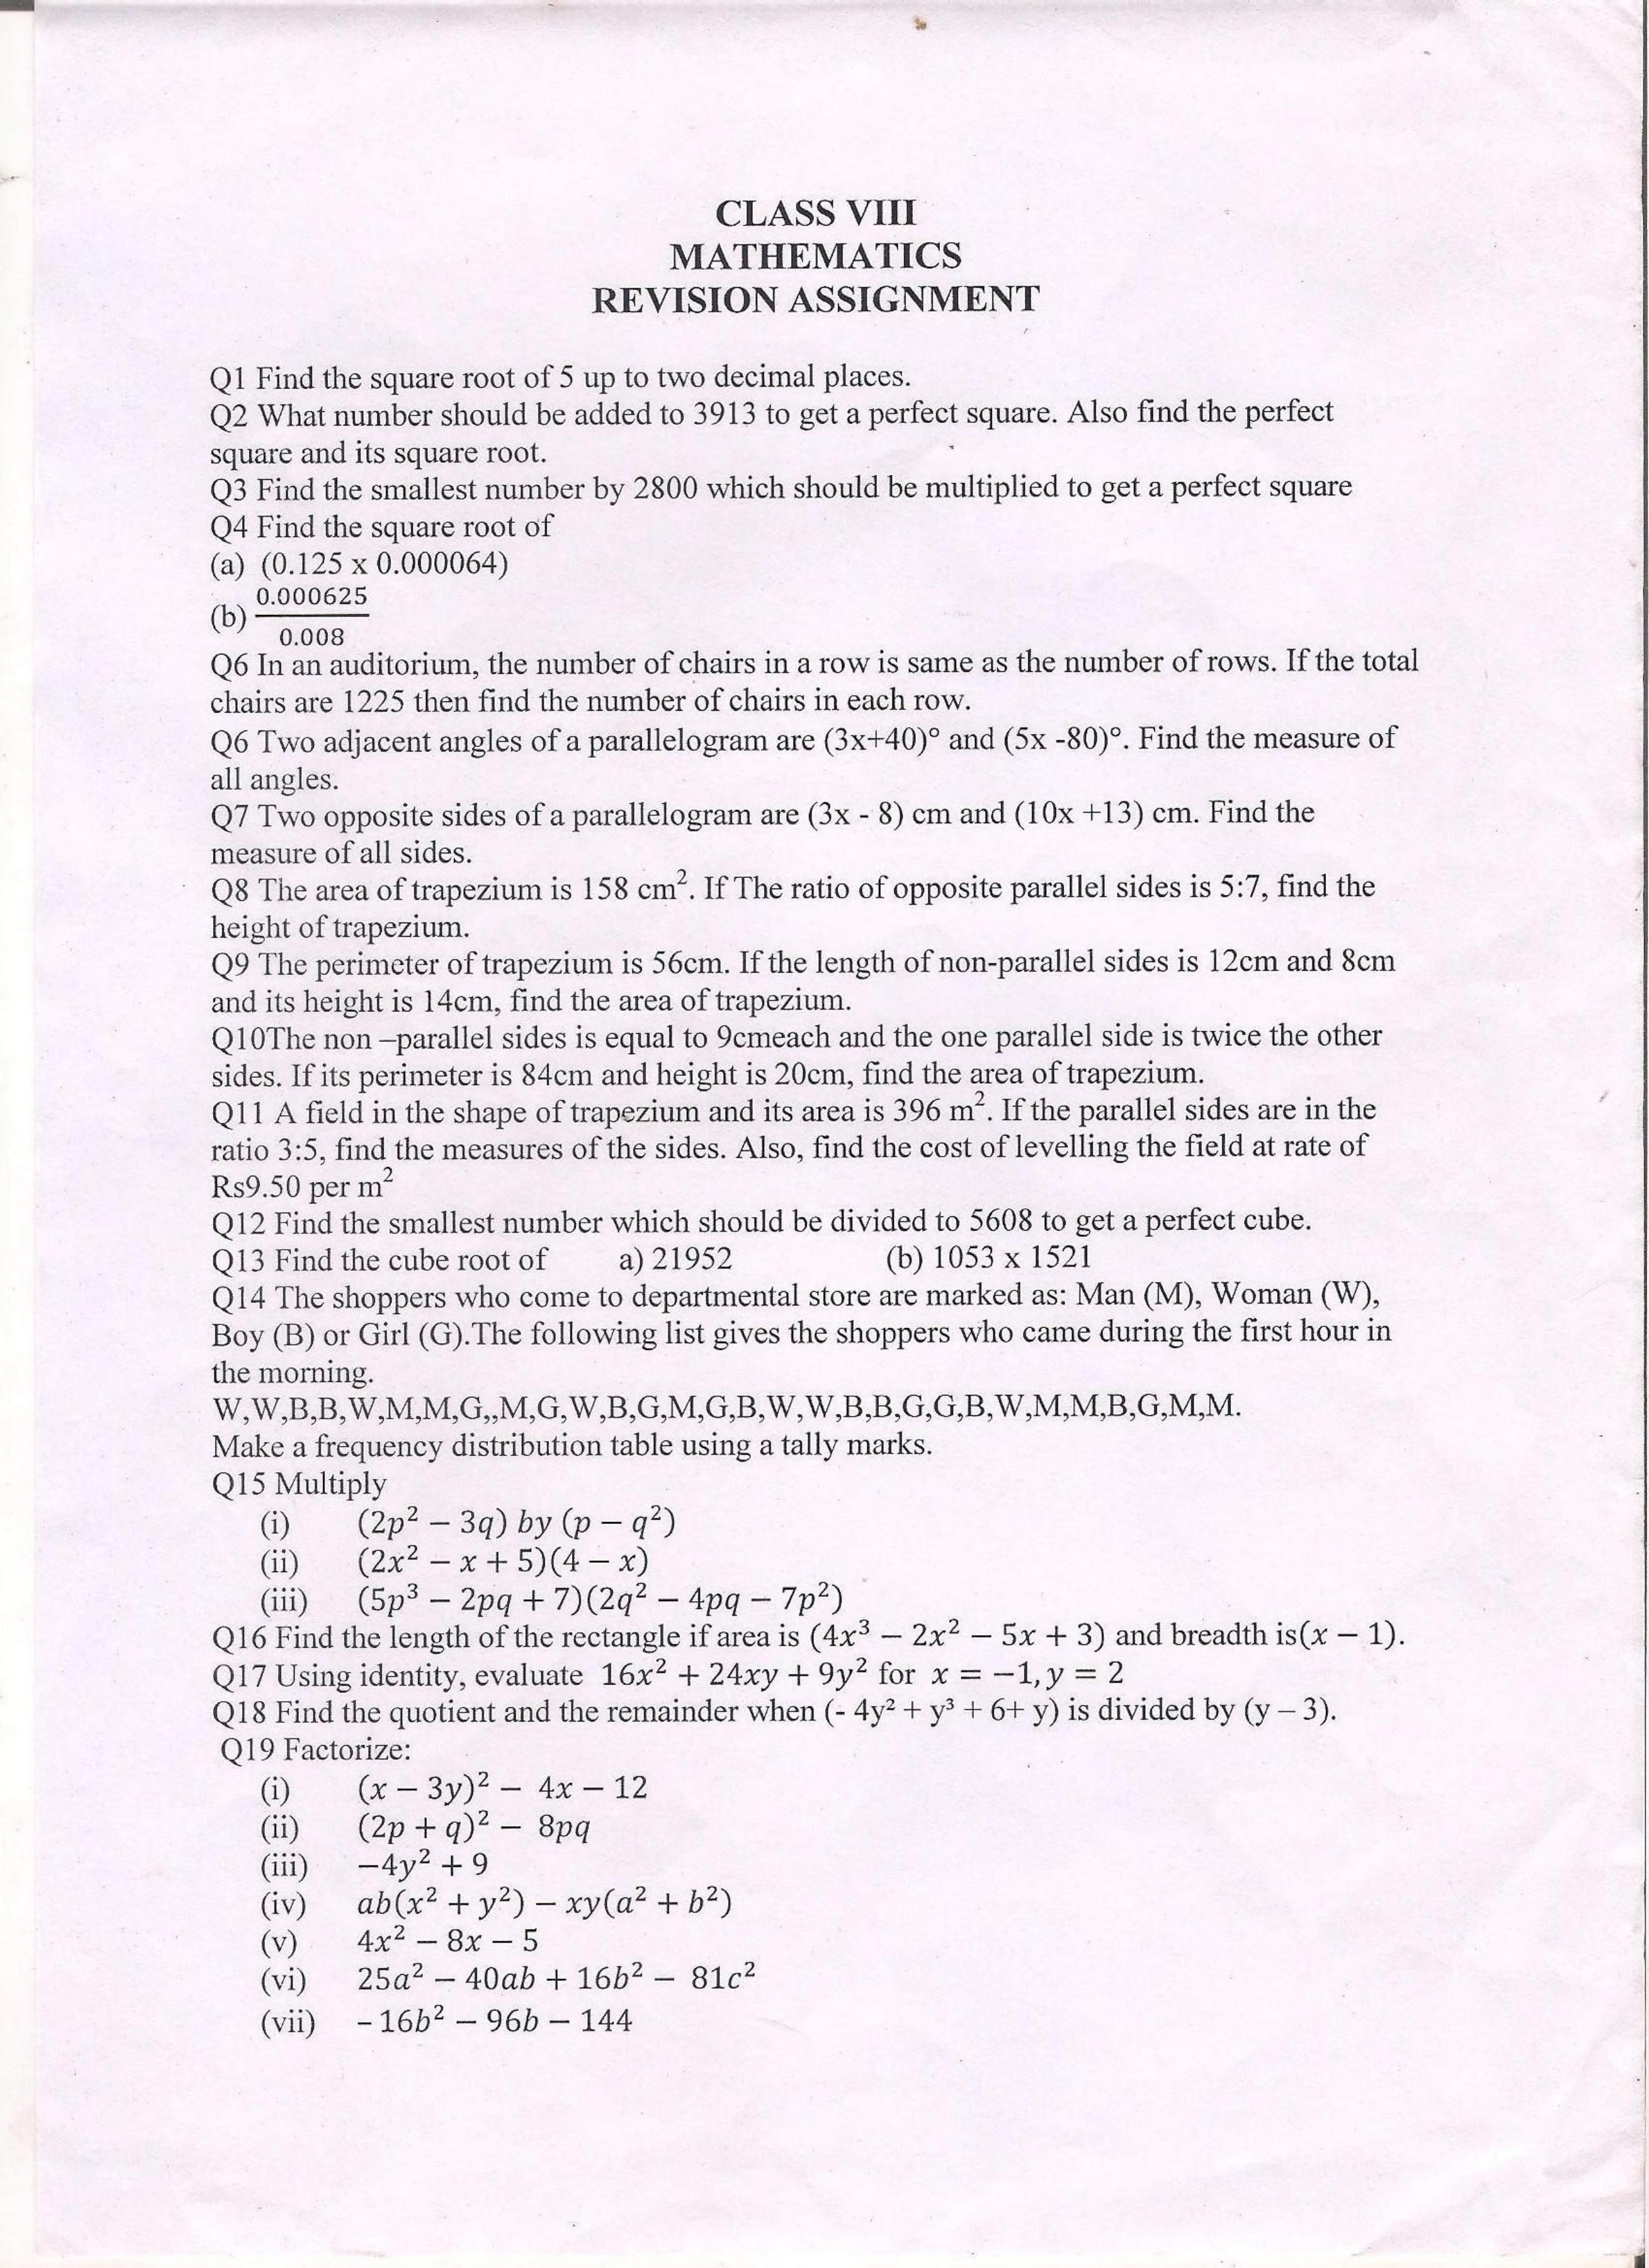 CBSE Worksheets for Class 8 Mathematics Assignment 14 - Page 1